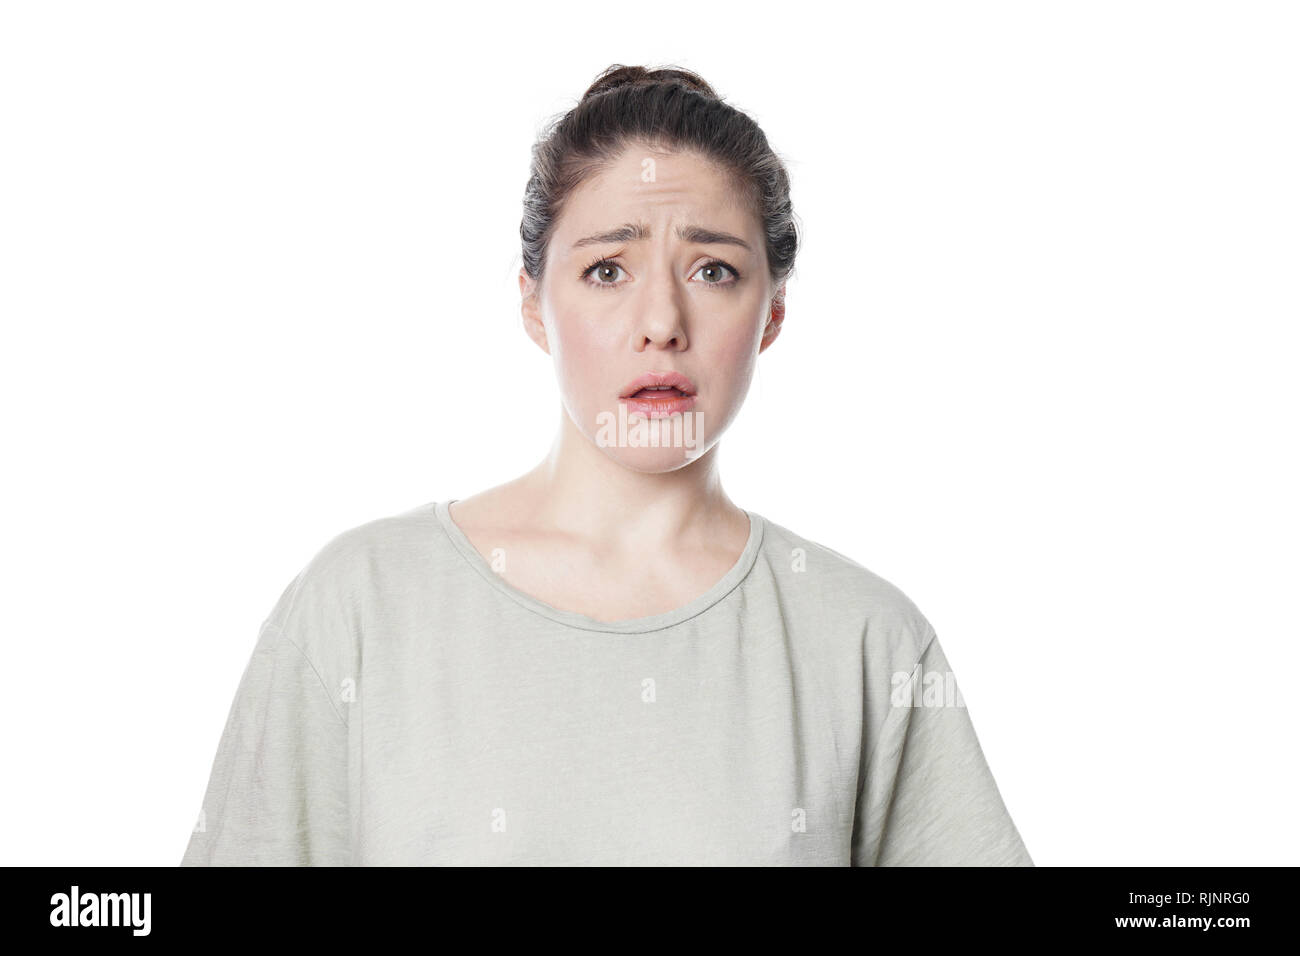 dumbfounded affronted young woman frowning with disbelief Stock Photo